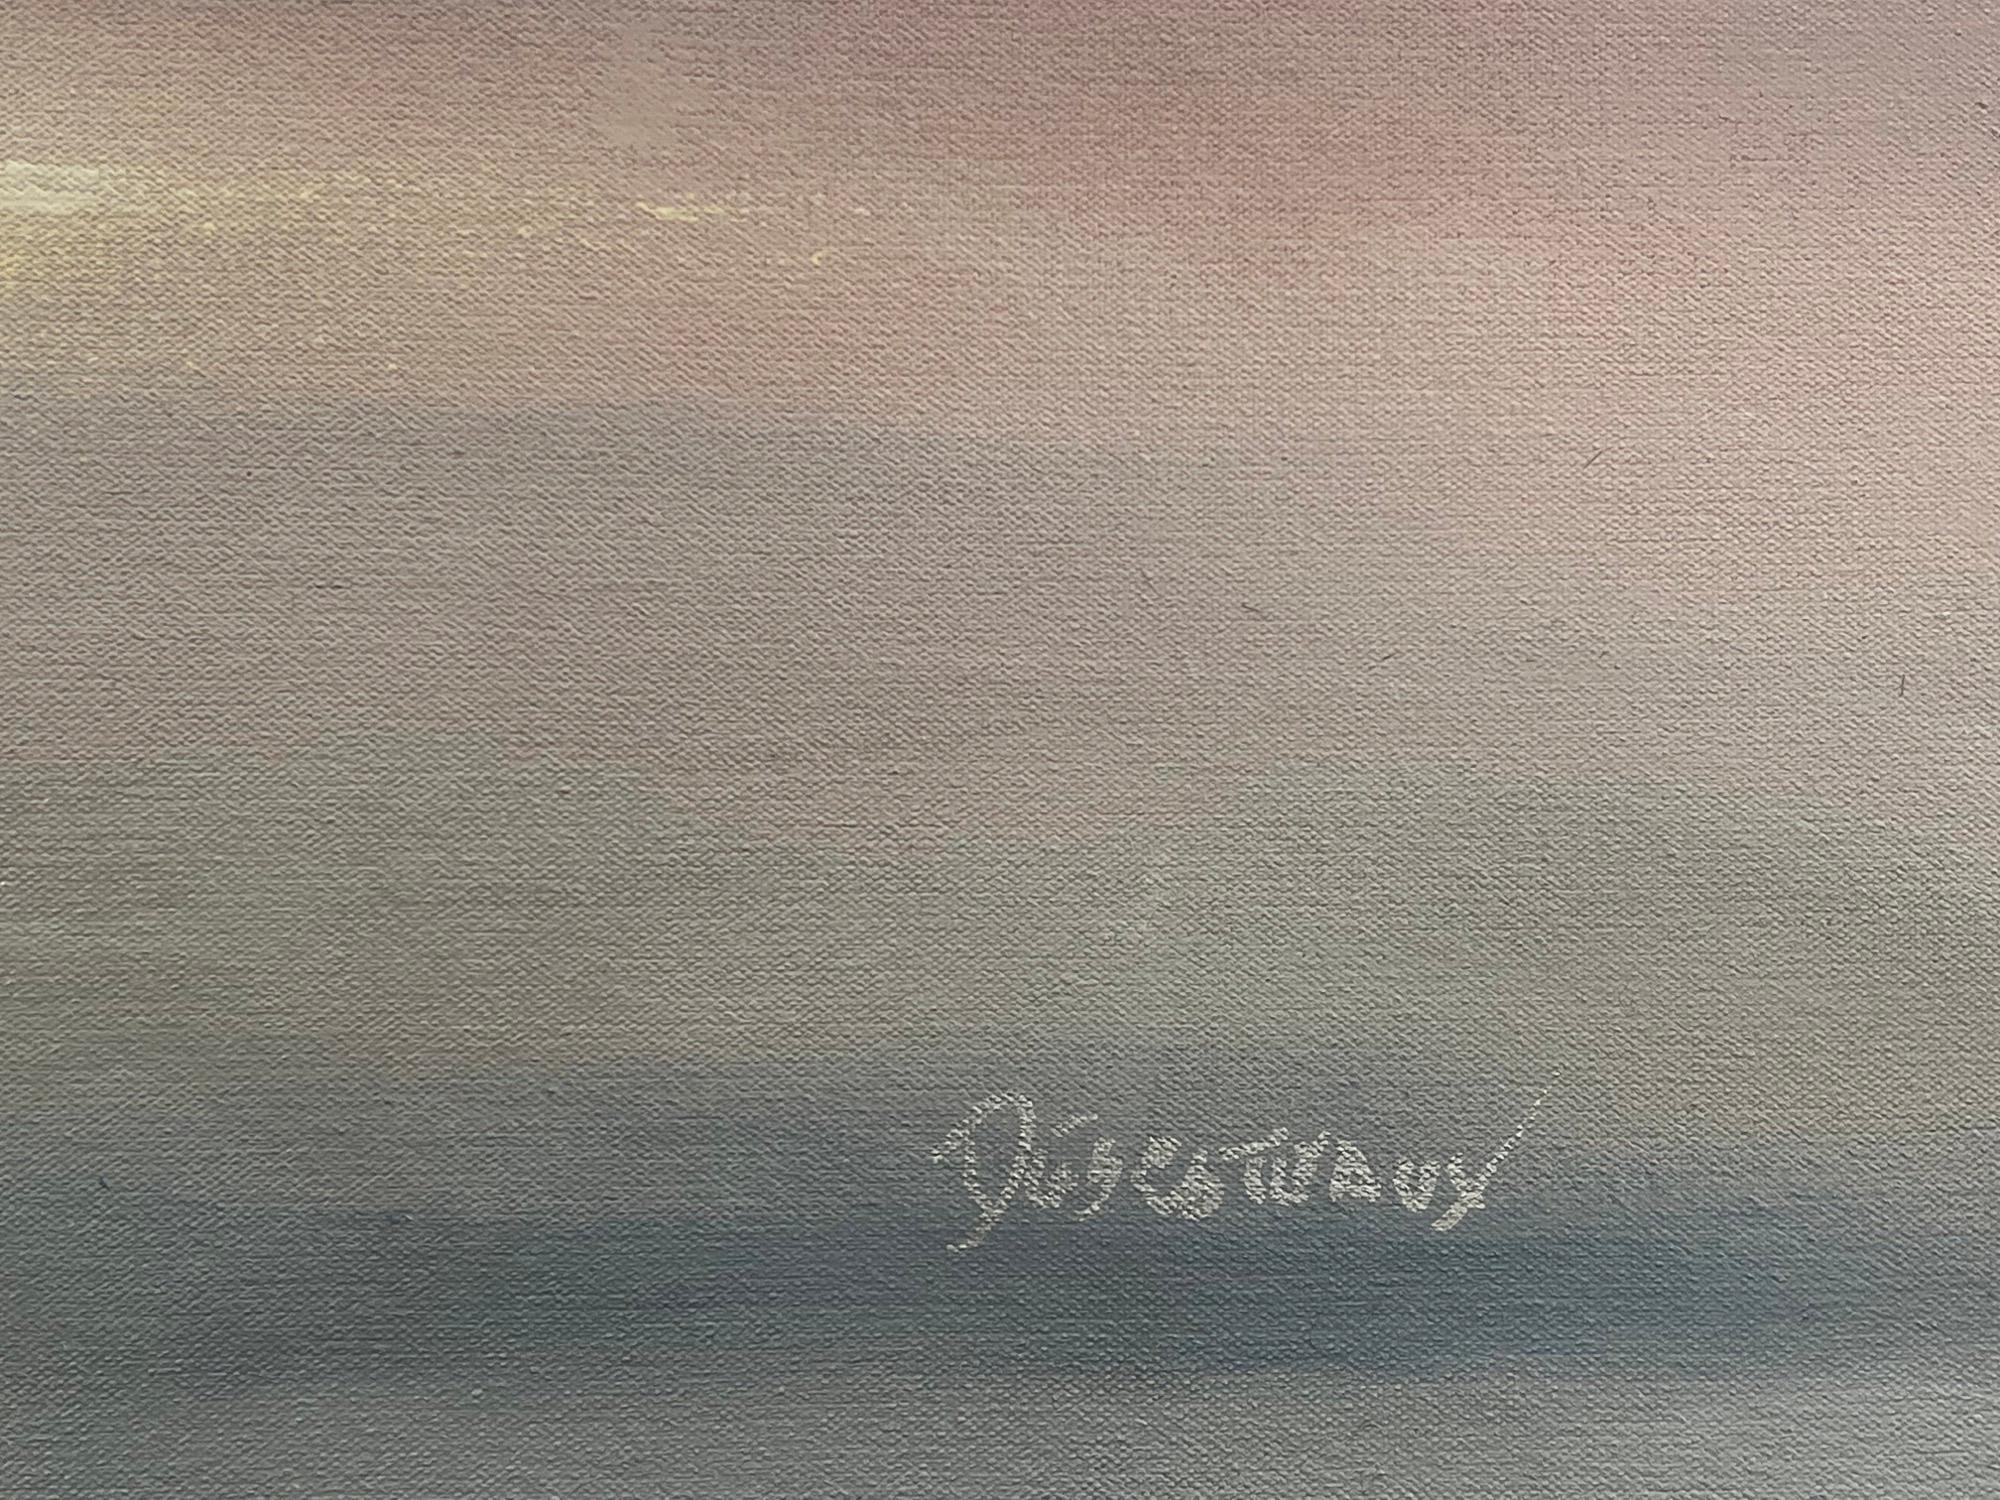 Distant Sound, XL moody pink horizon landscape, acrylic on canvas, 2022 For Sale 1